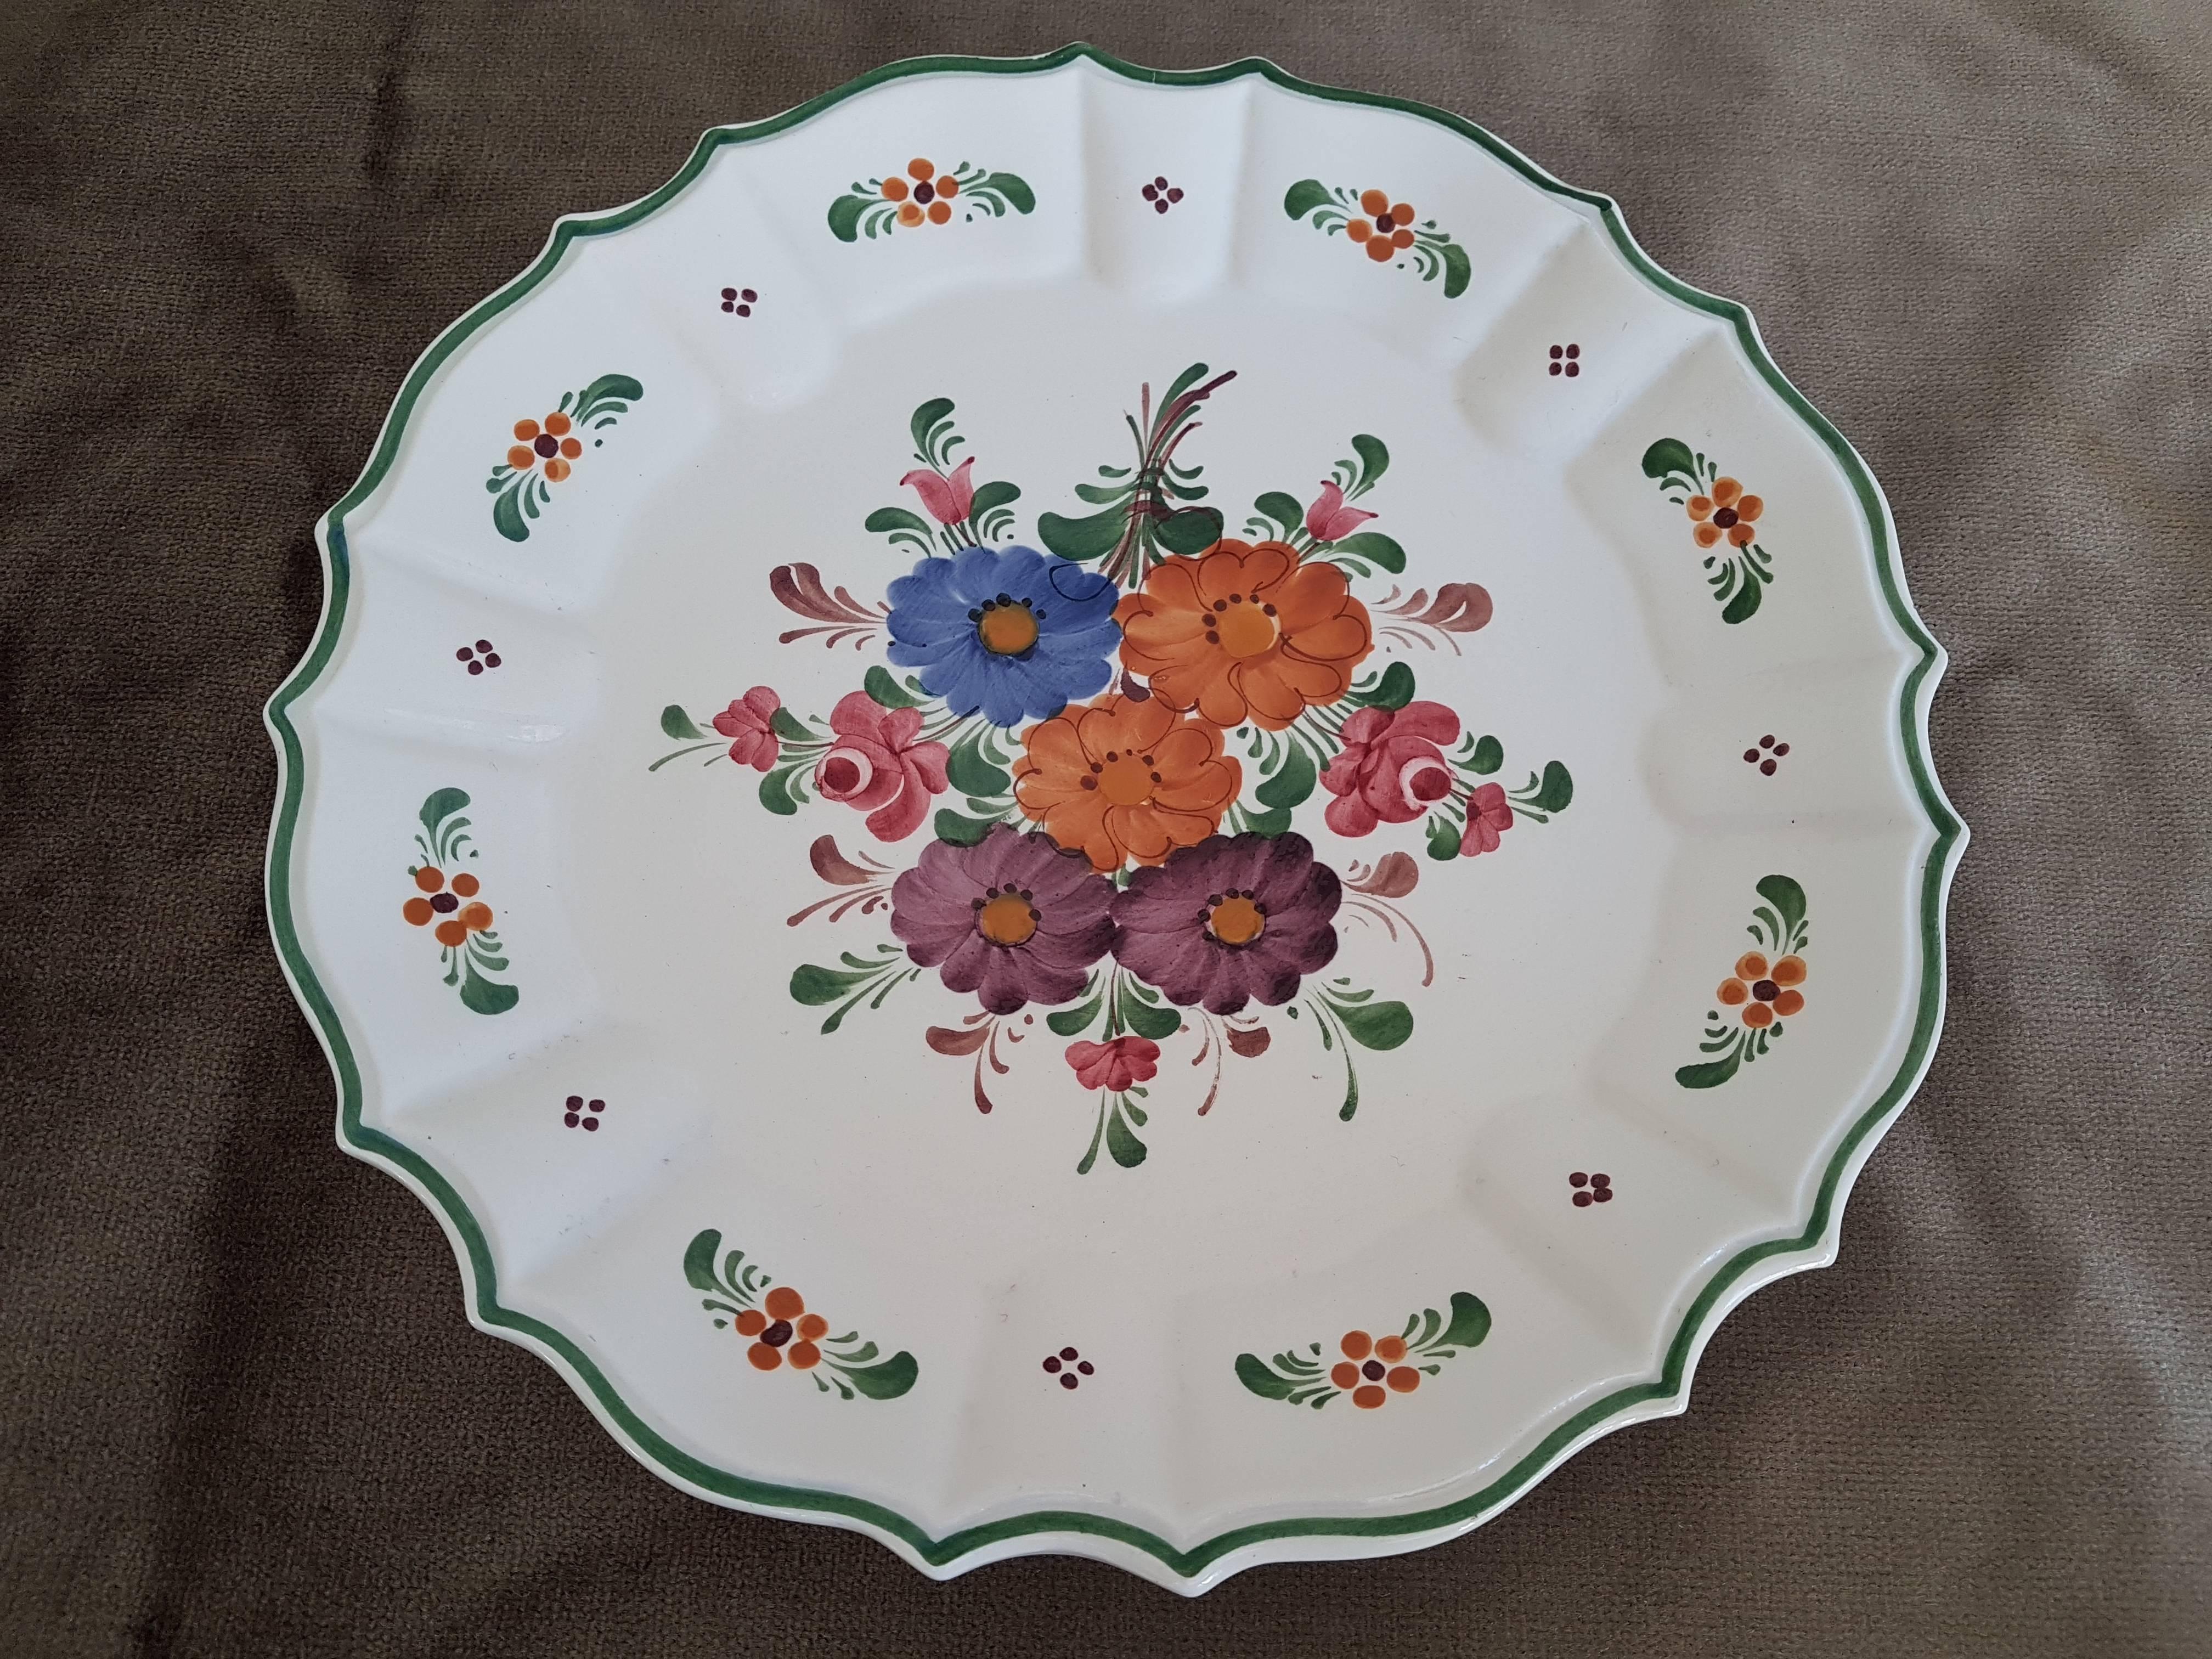 Set of three romantic Austrian Tyrol ceramic, country mountainside decorative plates. With floral motifs and gilt wall hangers with lion feet, ready to hang.
Hand painted, signed by Wechsler Tyrol and numbered by Austrian
Measures: One plate 26